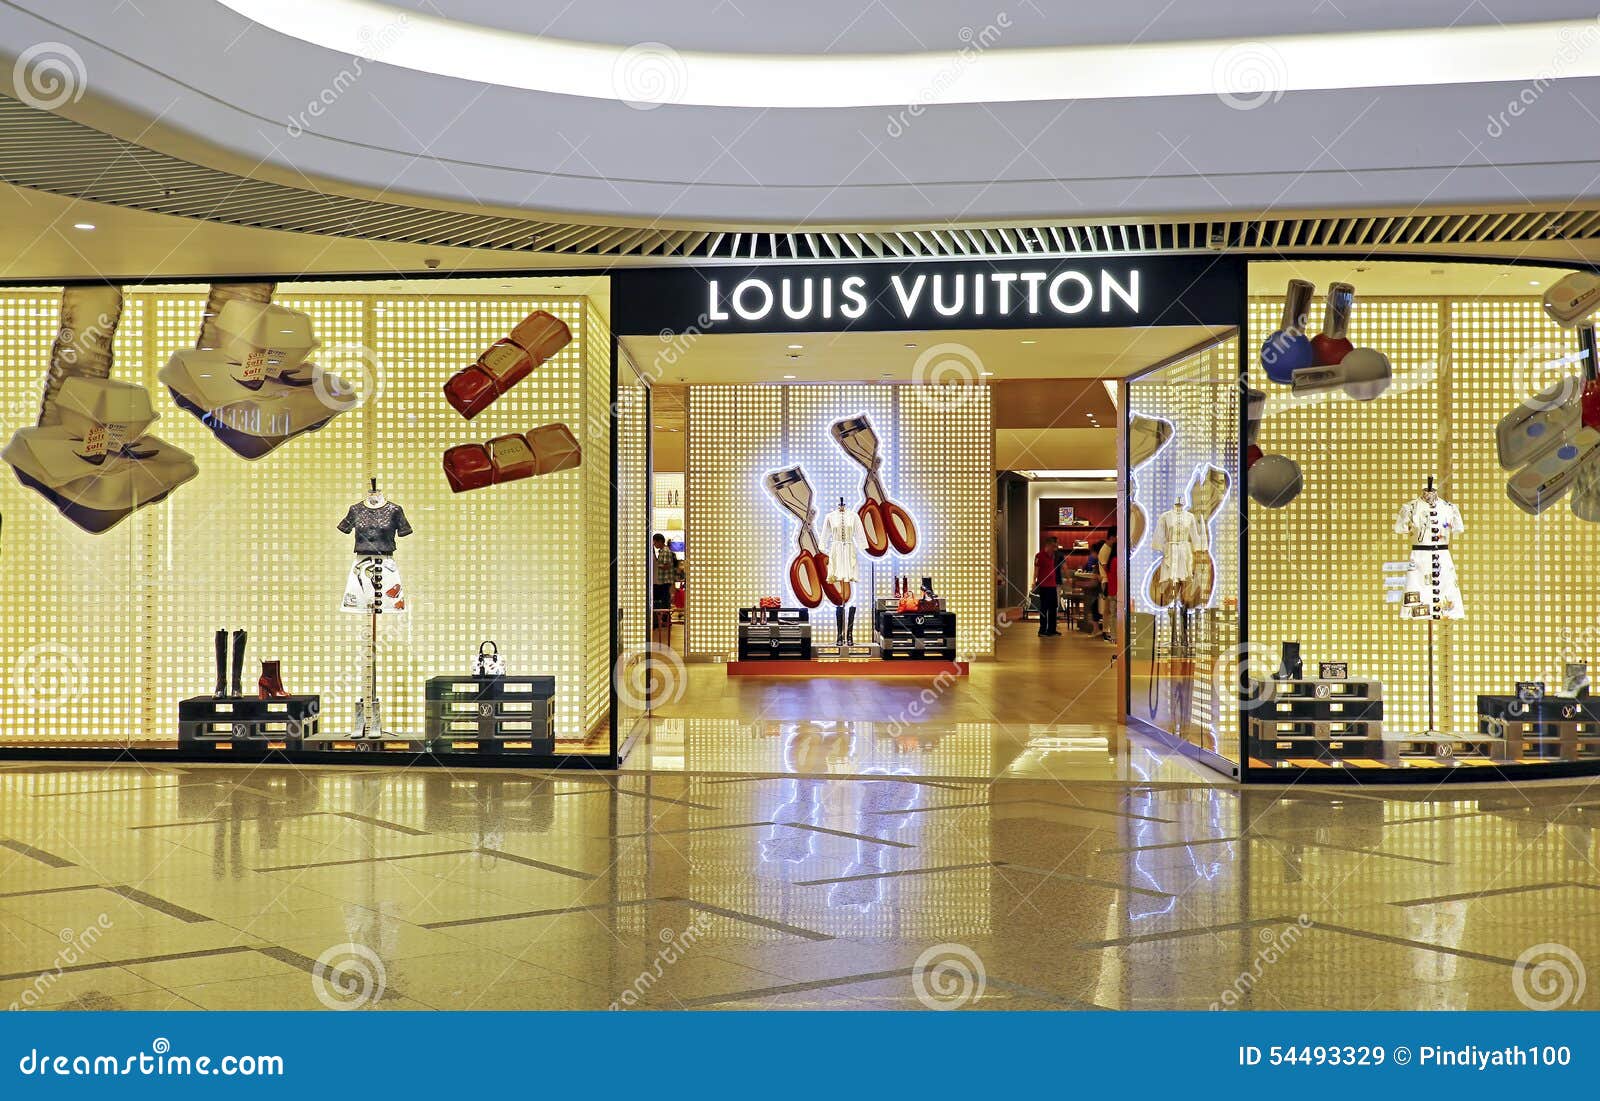 Louis Vuitton Fashion Boutique Editorial Stock Image - Image of clothes, selling: 54493329